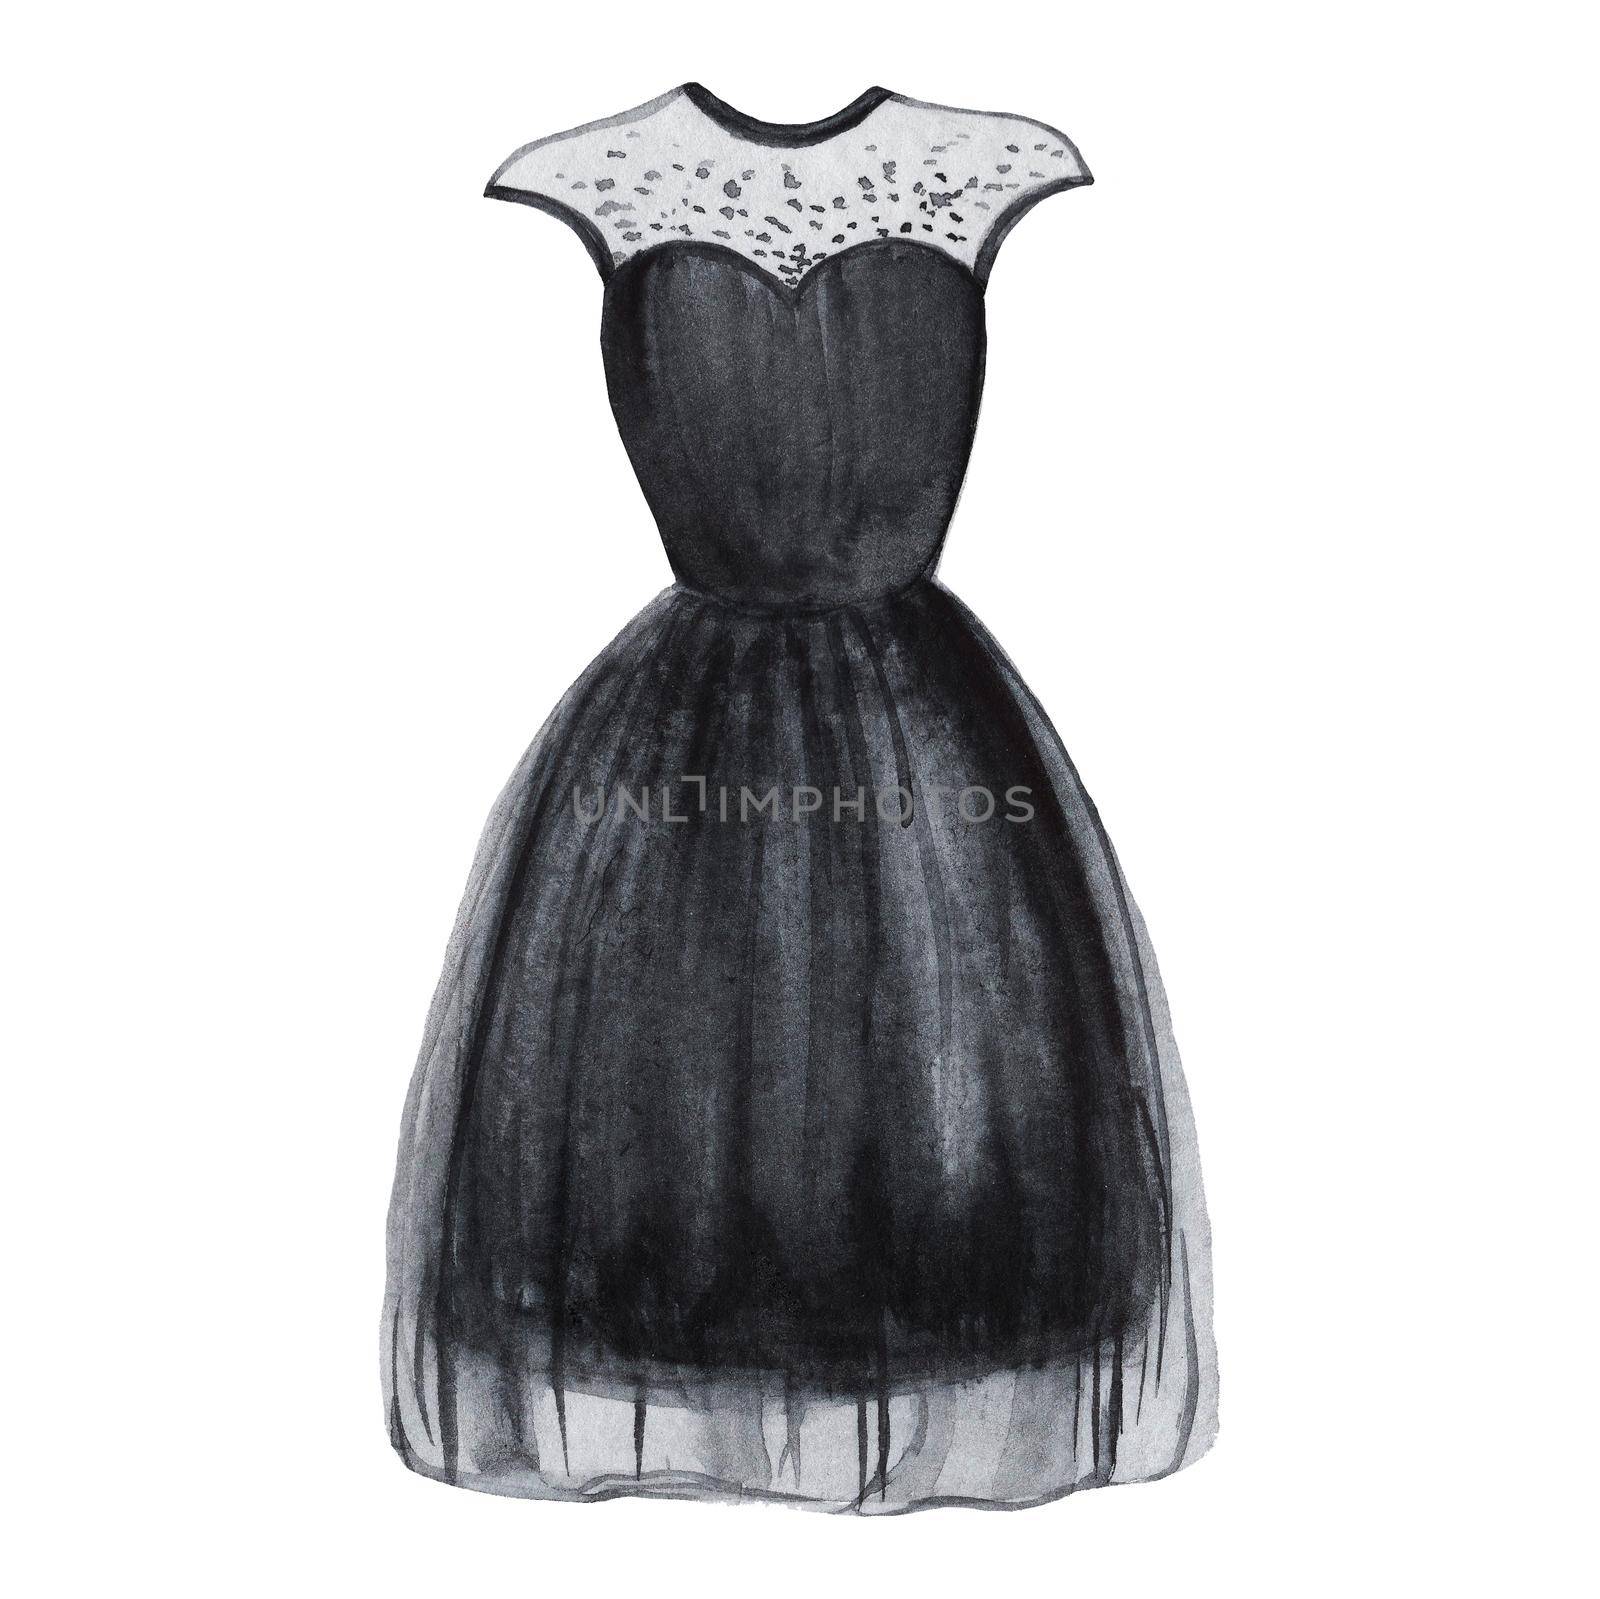 watercolor hand drawn black dress isolated on white background by dreamloud